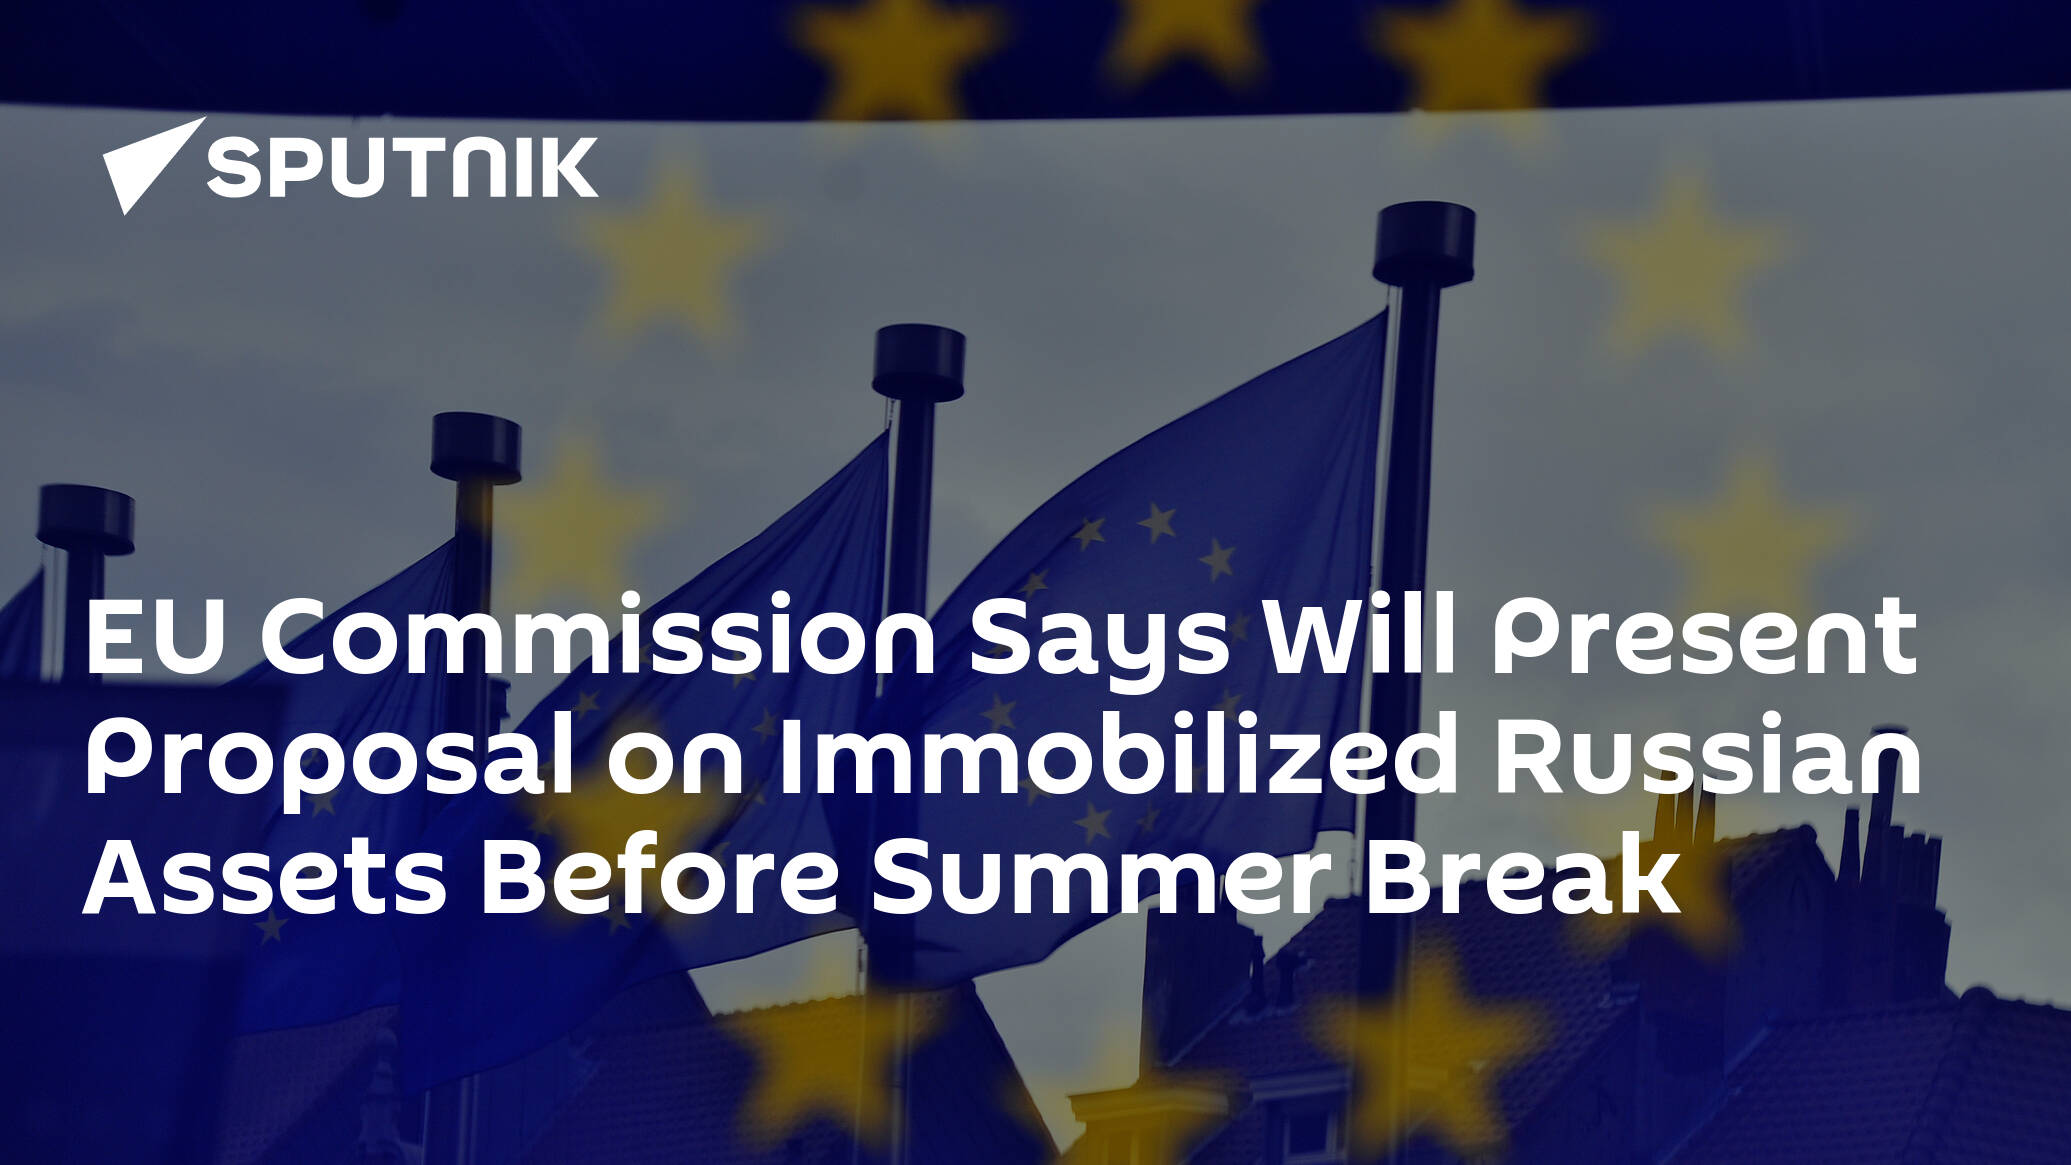 EU Commission Says Will Present Proposal on Immobilized Russian Assets Before Summer Break